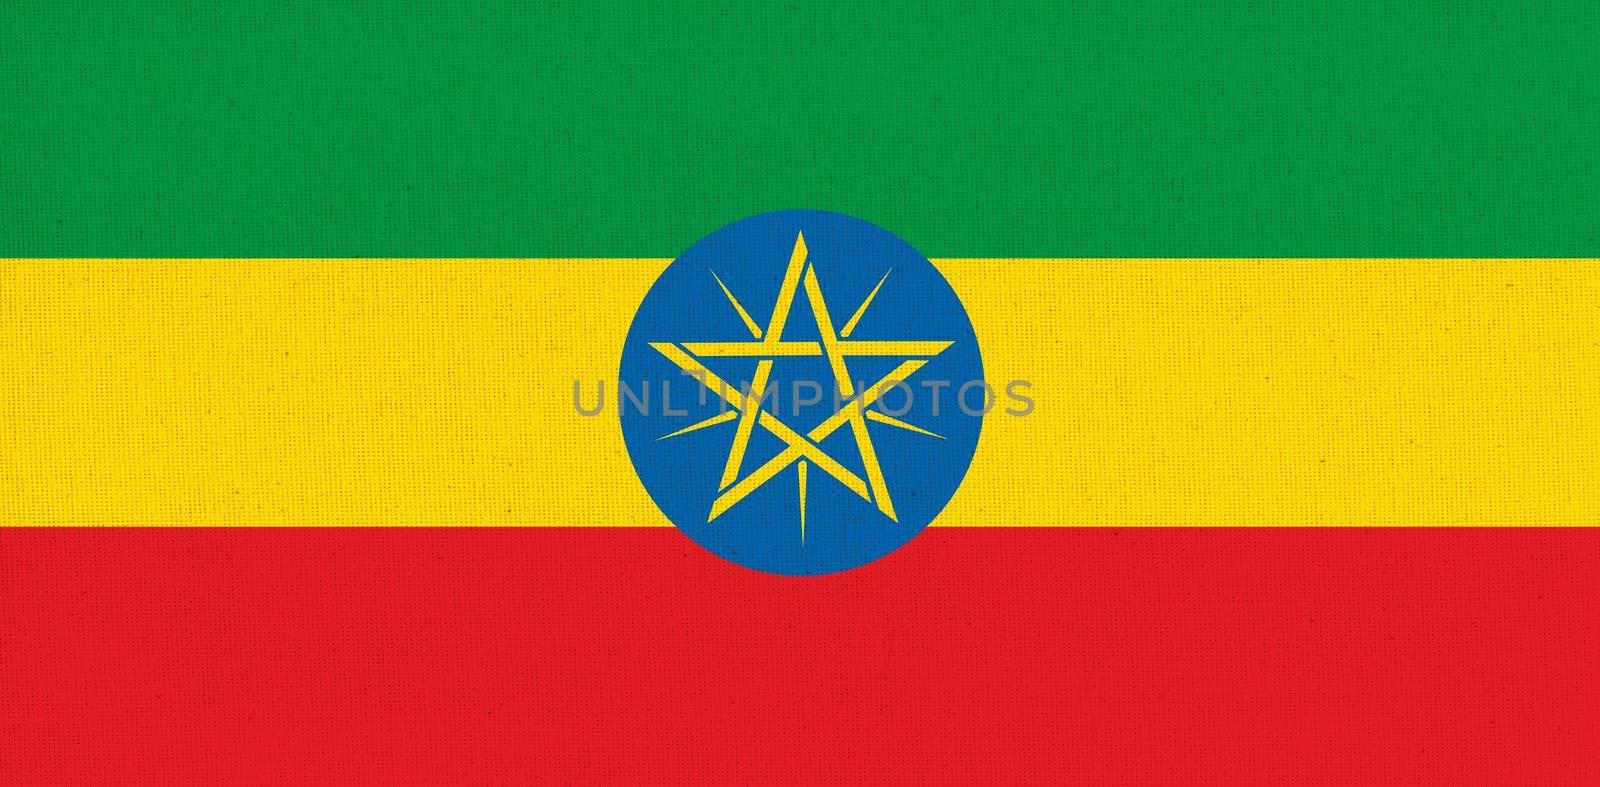 Flag of Ethiopia. flag of African country Ethiopia on fabric surface. Fabric texture. National symbol of Ethiopia on patterned background. Federal Democratic Republic of Ethiopia